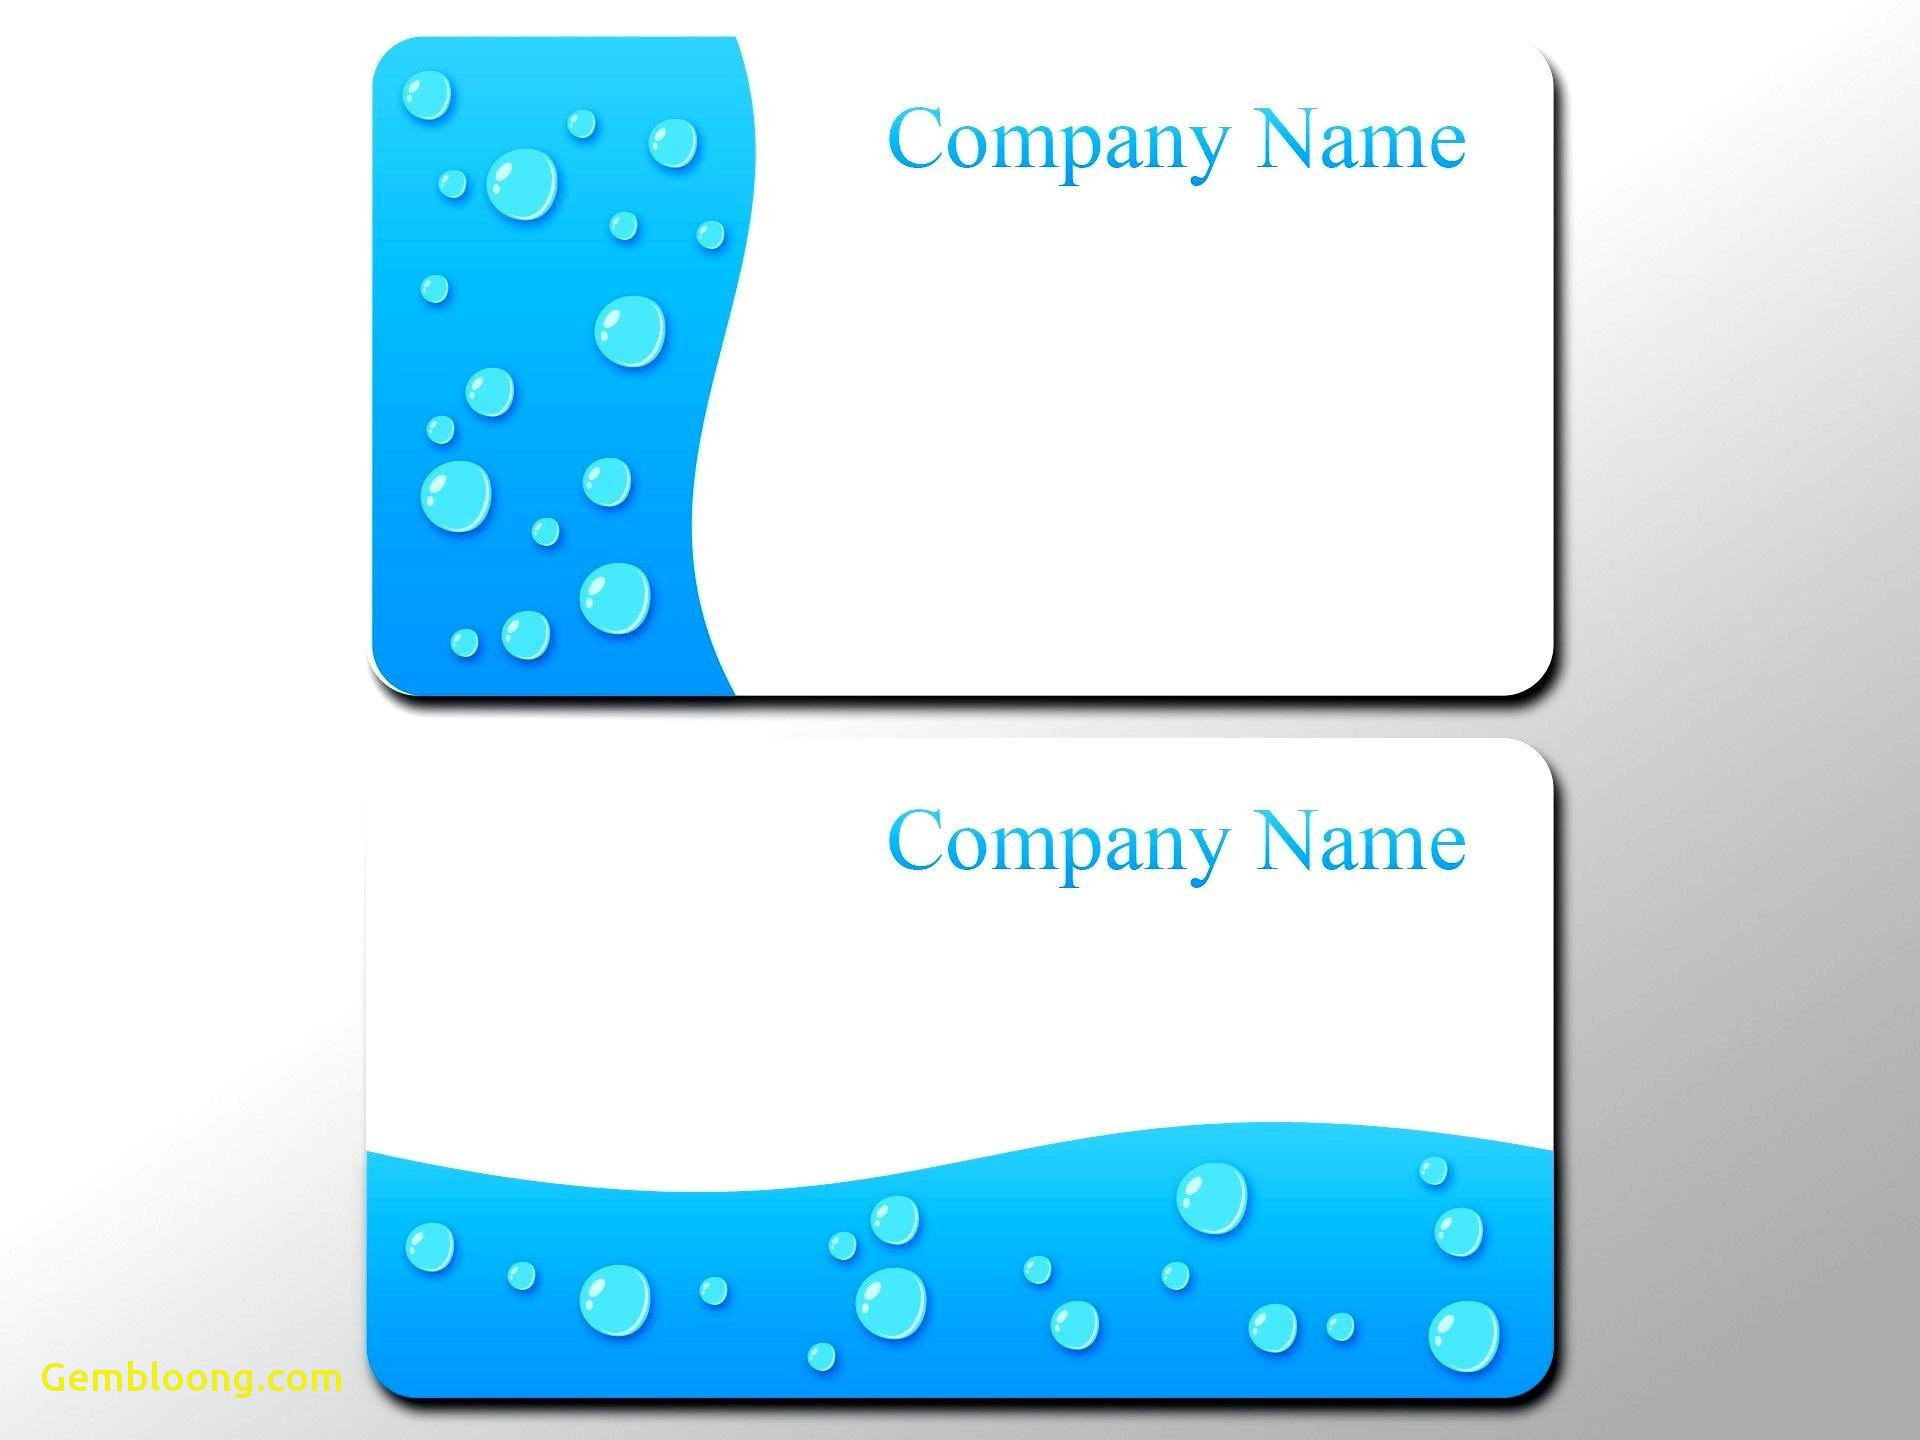 Business Card Photoshop Template Psd Awesome 016 Business With Blank Business Card Template Photoshop